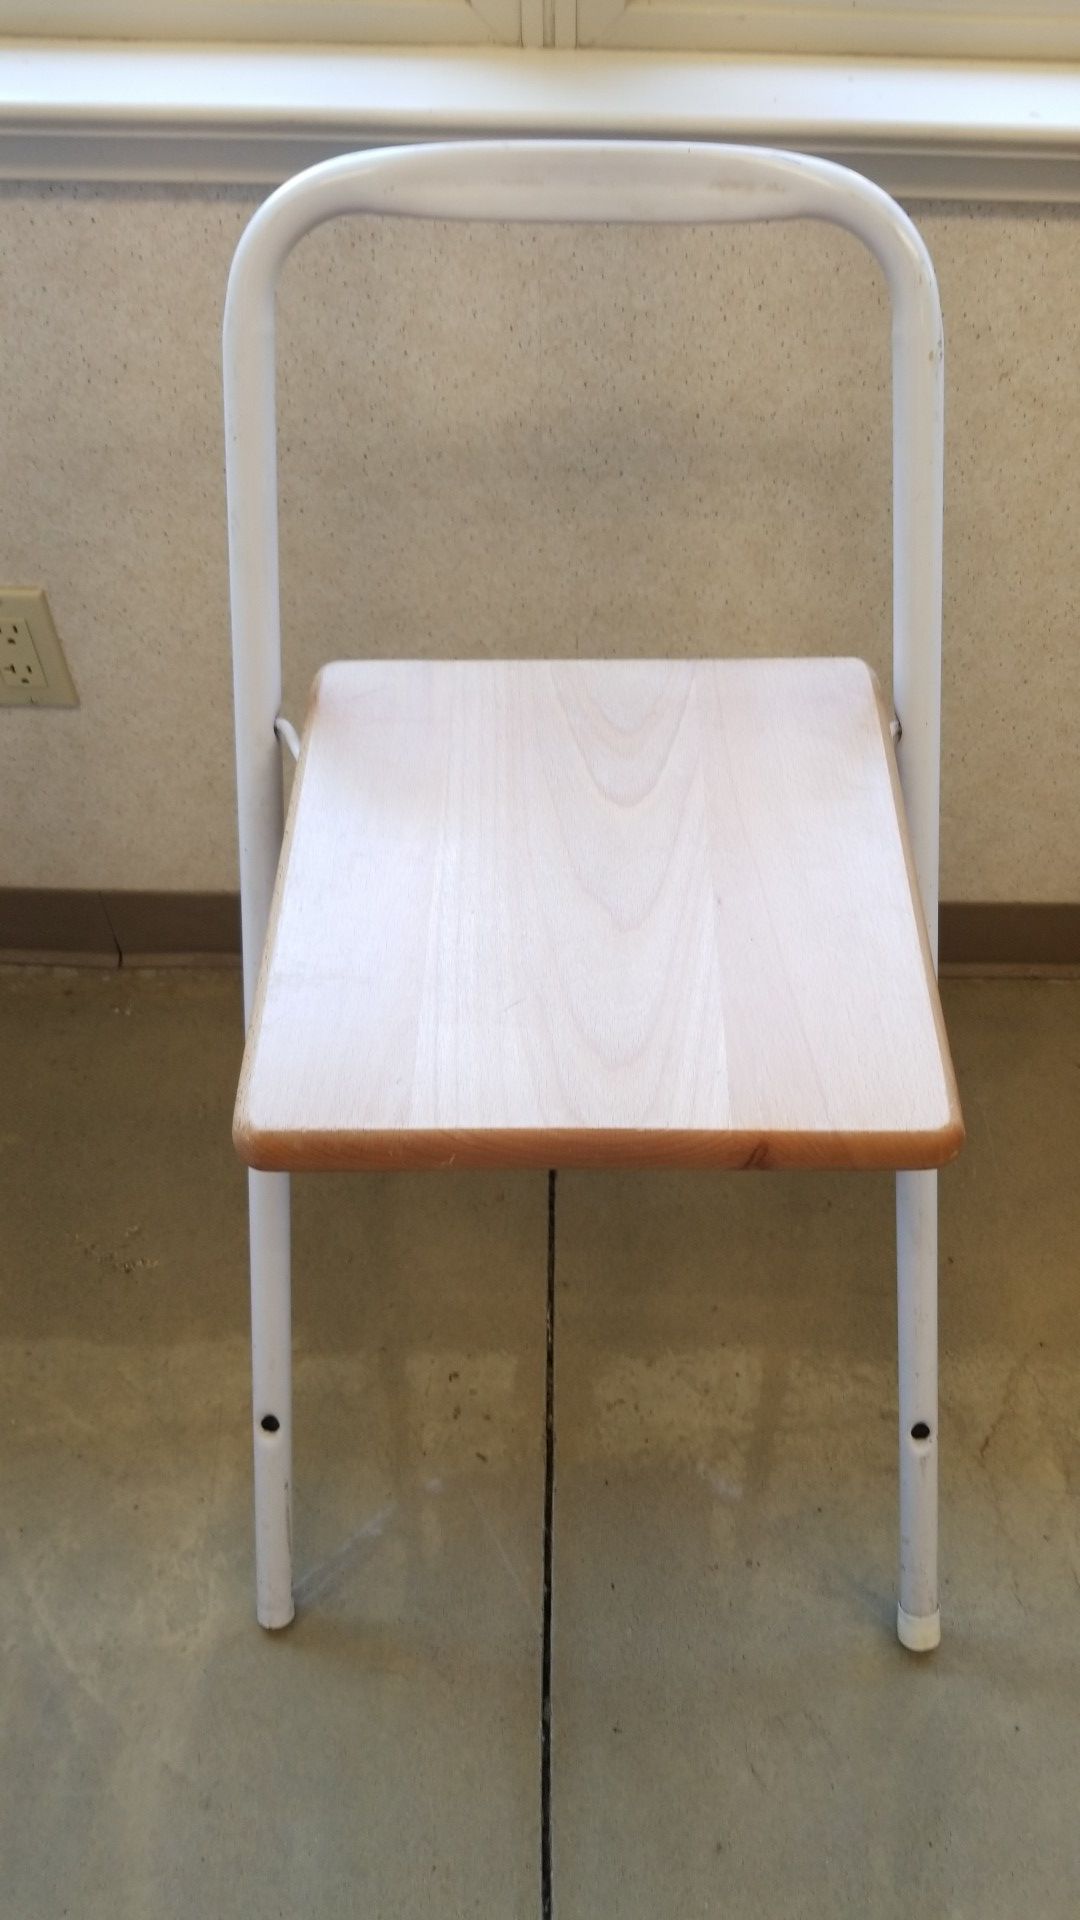 Folding high stool chair for sale